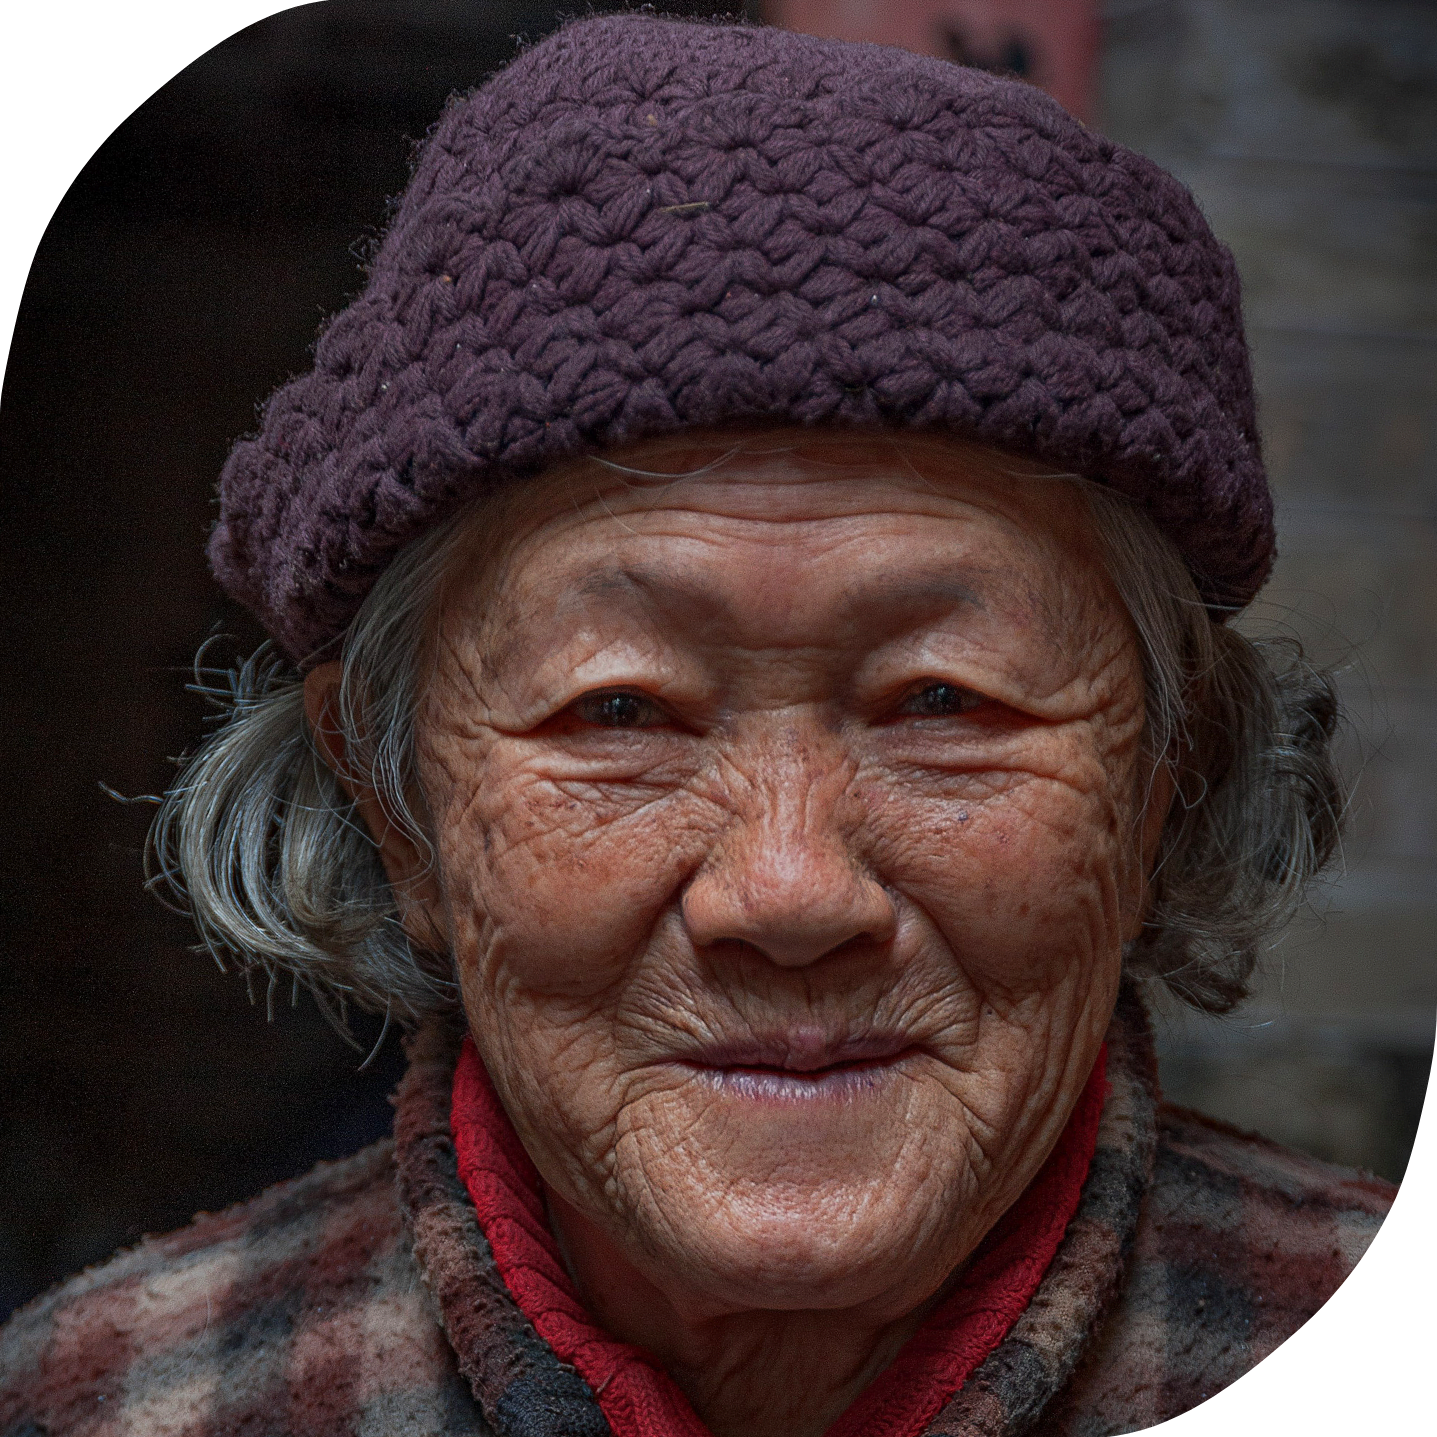 An elderly Asian woman wearing a knit cap is looking into the camera